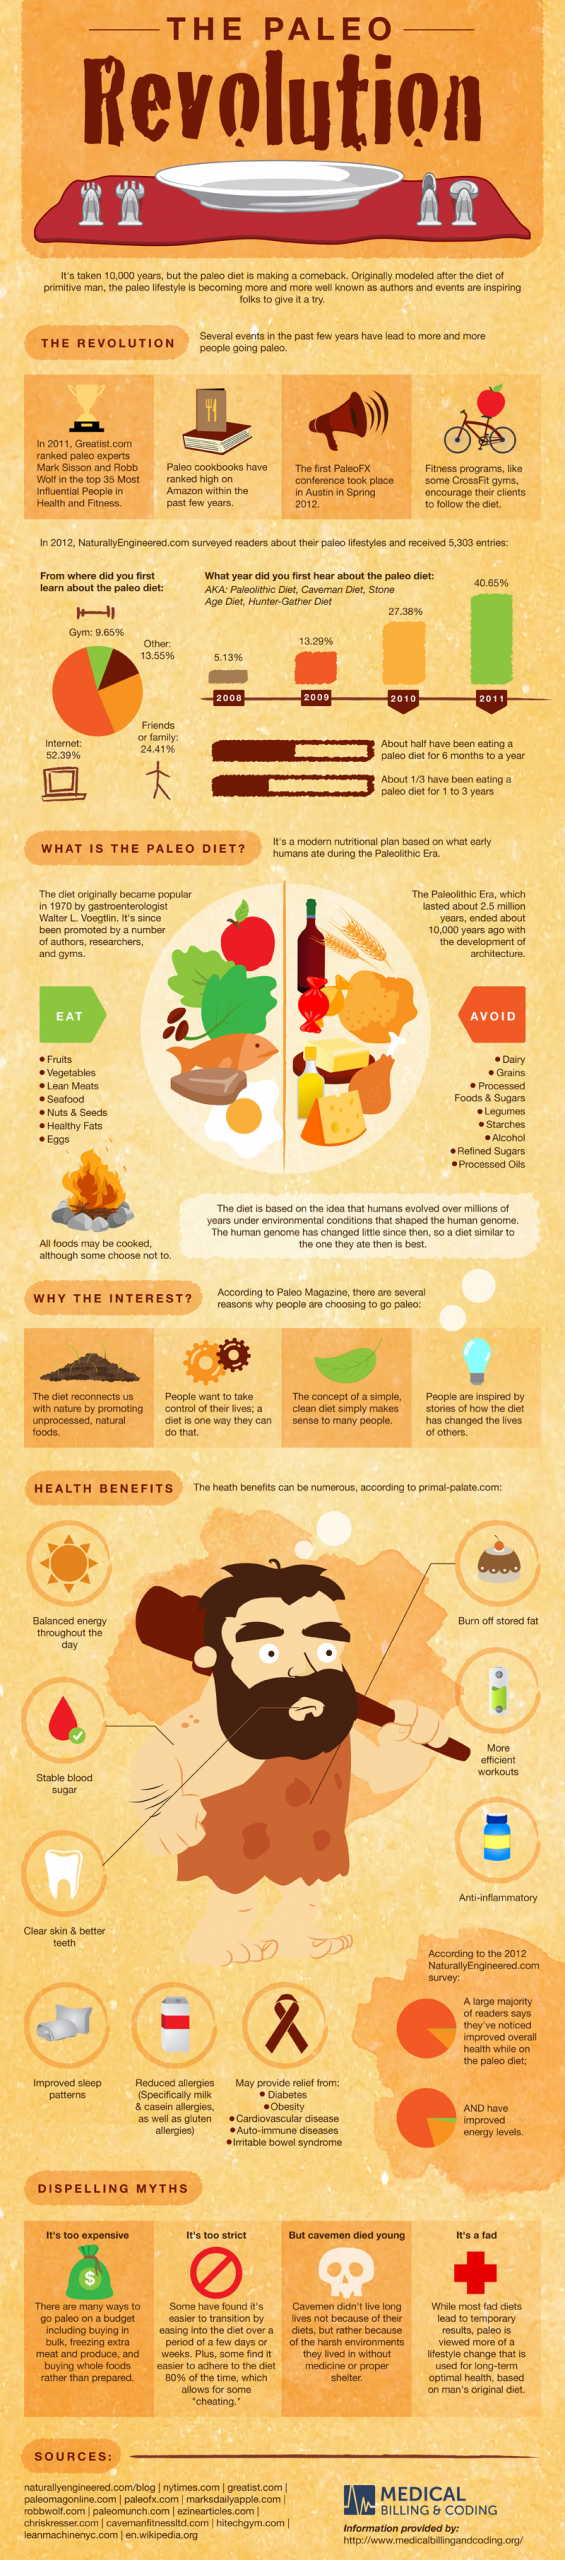 Paleo Diet Infographic
 The Paleo Diet Origins Trivia and Dispelling Myths